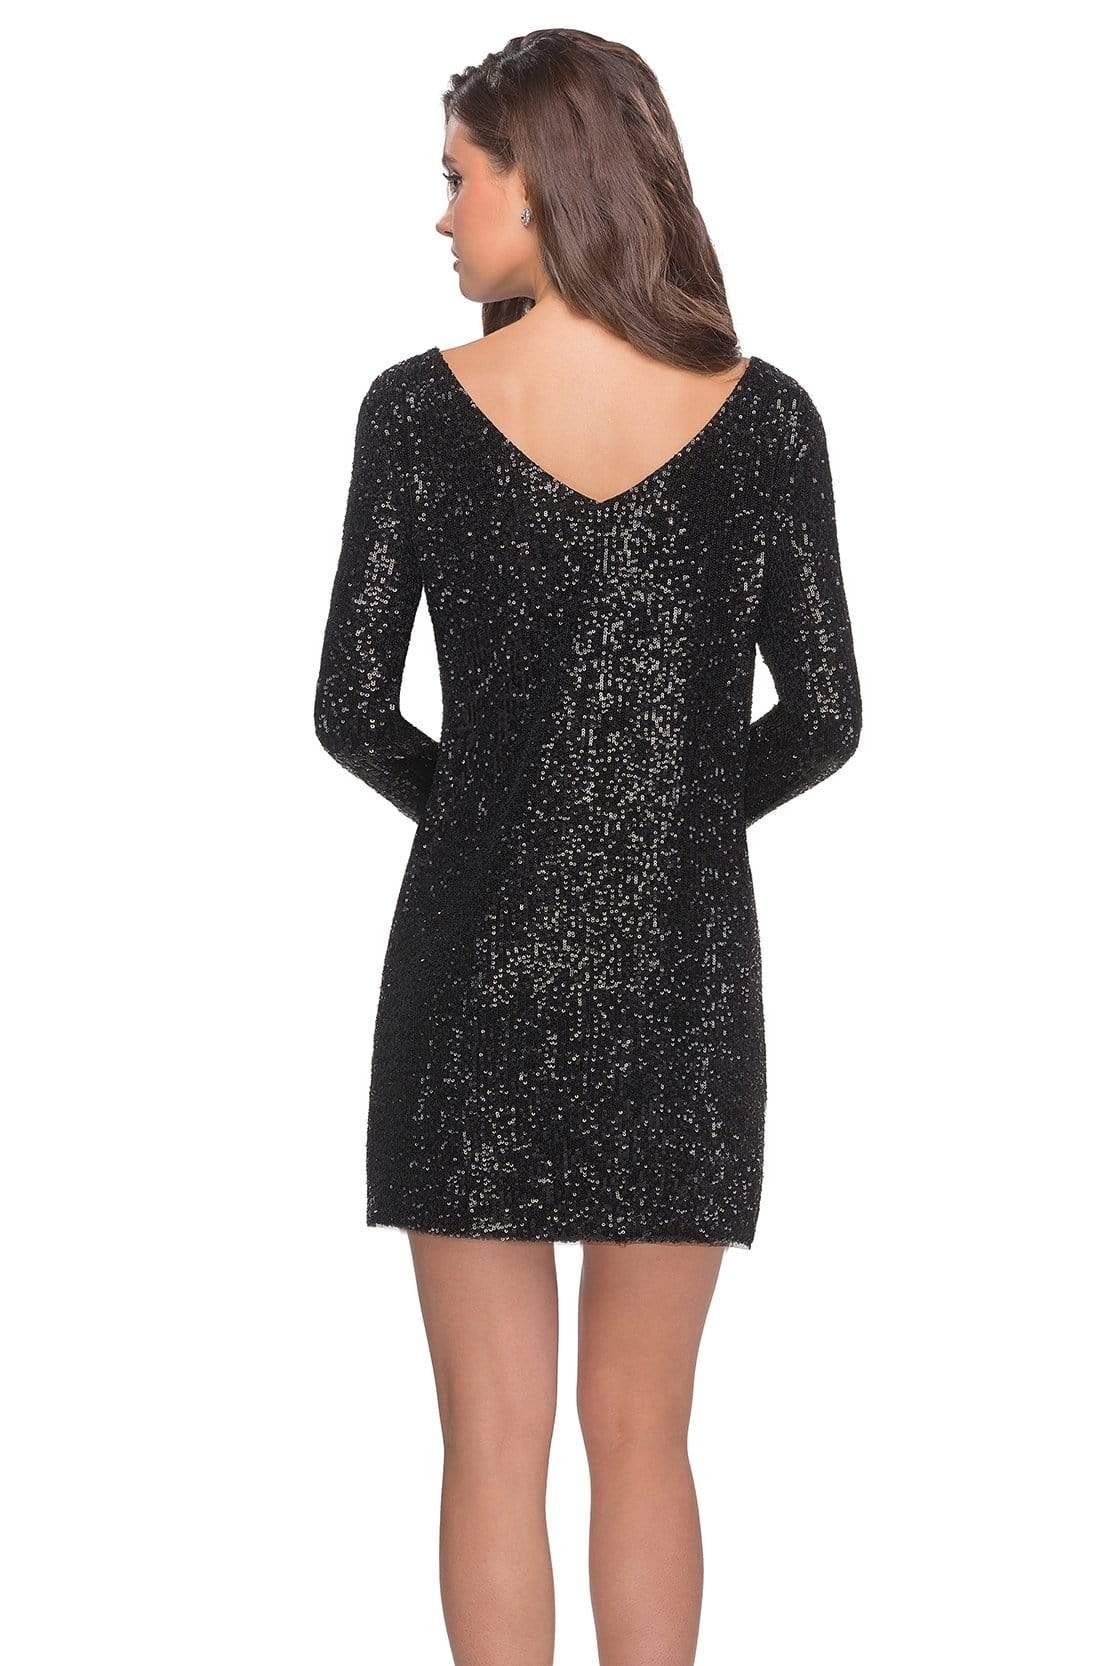 La Femme - Sequin Embellished Long Sleeves Dress 28194SC - 2 pcs Black in Size 2 and 6 Available CCSALE